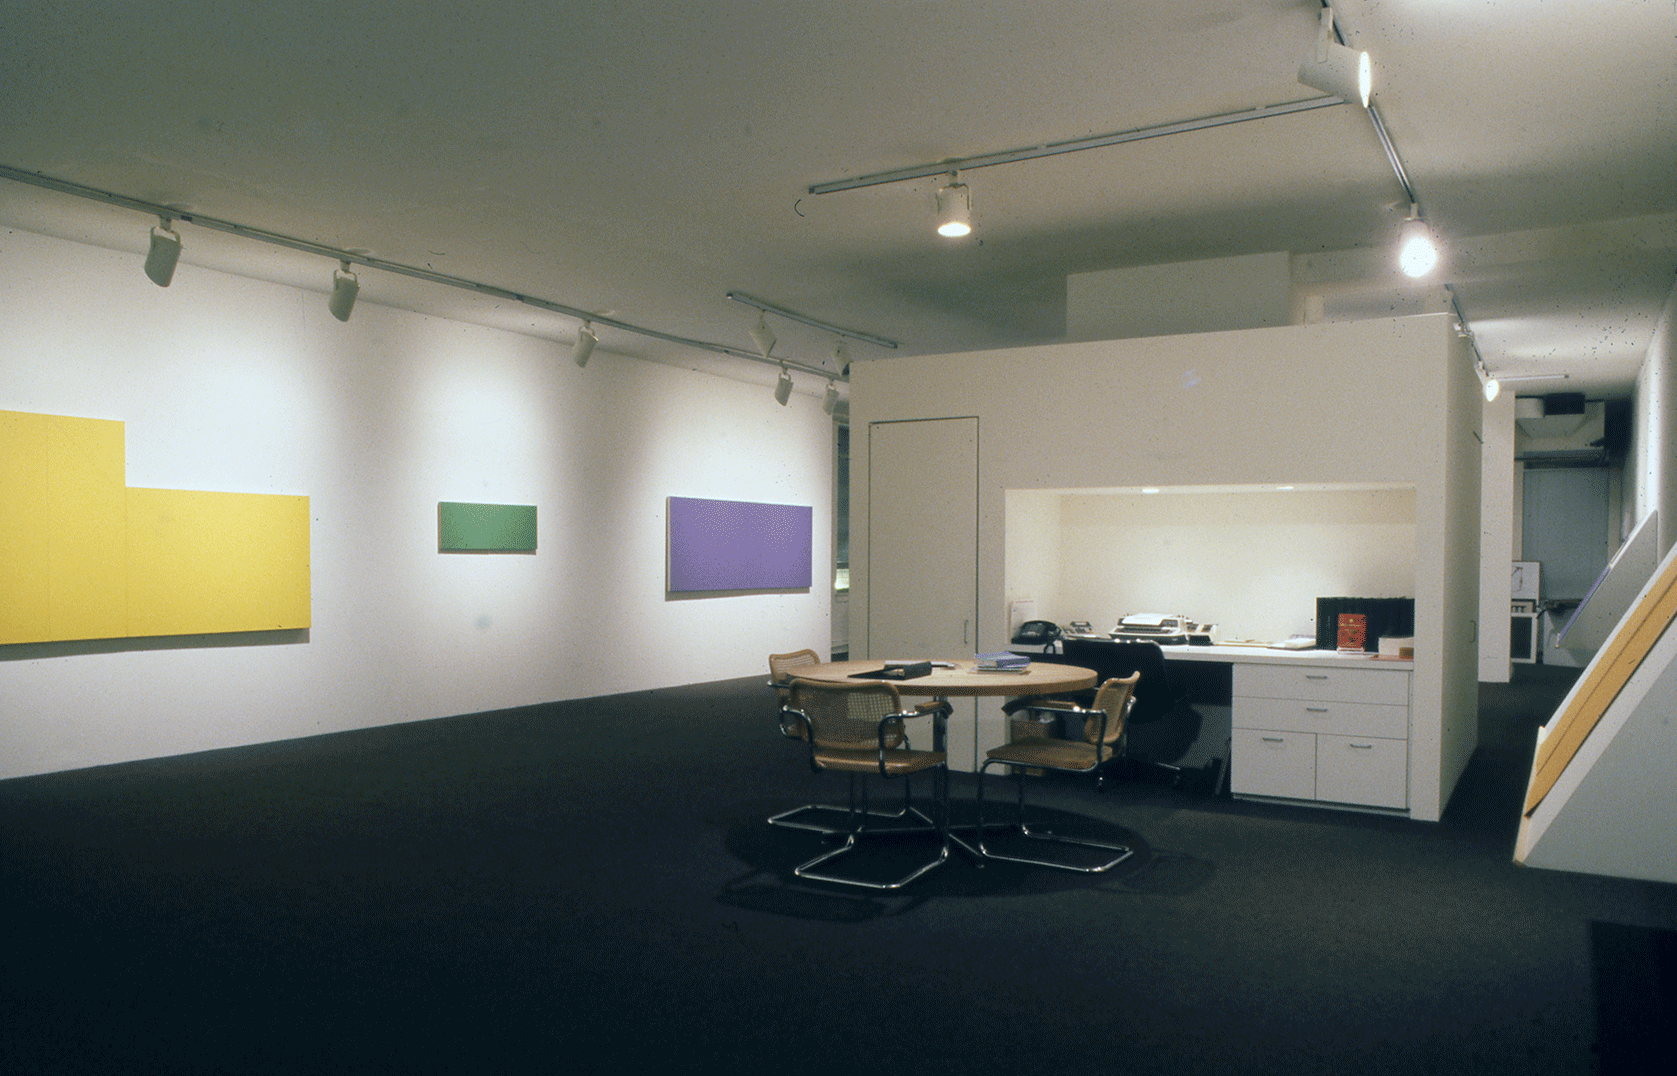 Installation view at Rhona Hoffman Gallery, Robert Mangold, Paintings on Canvas, Masonite, and Paper, 1977